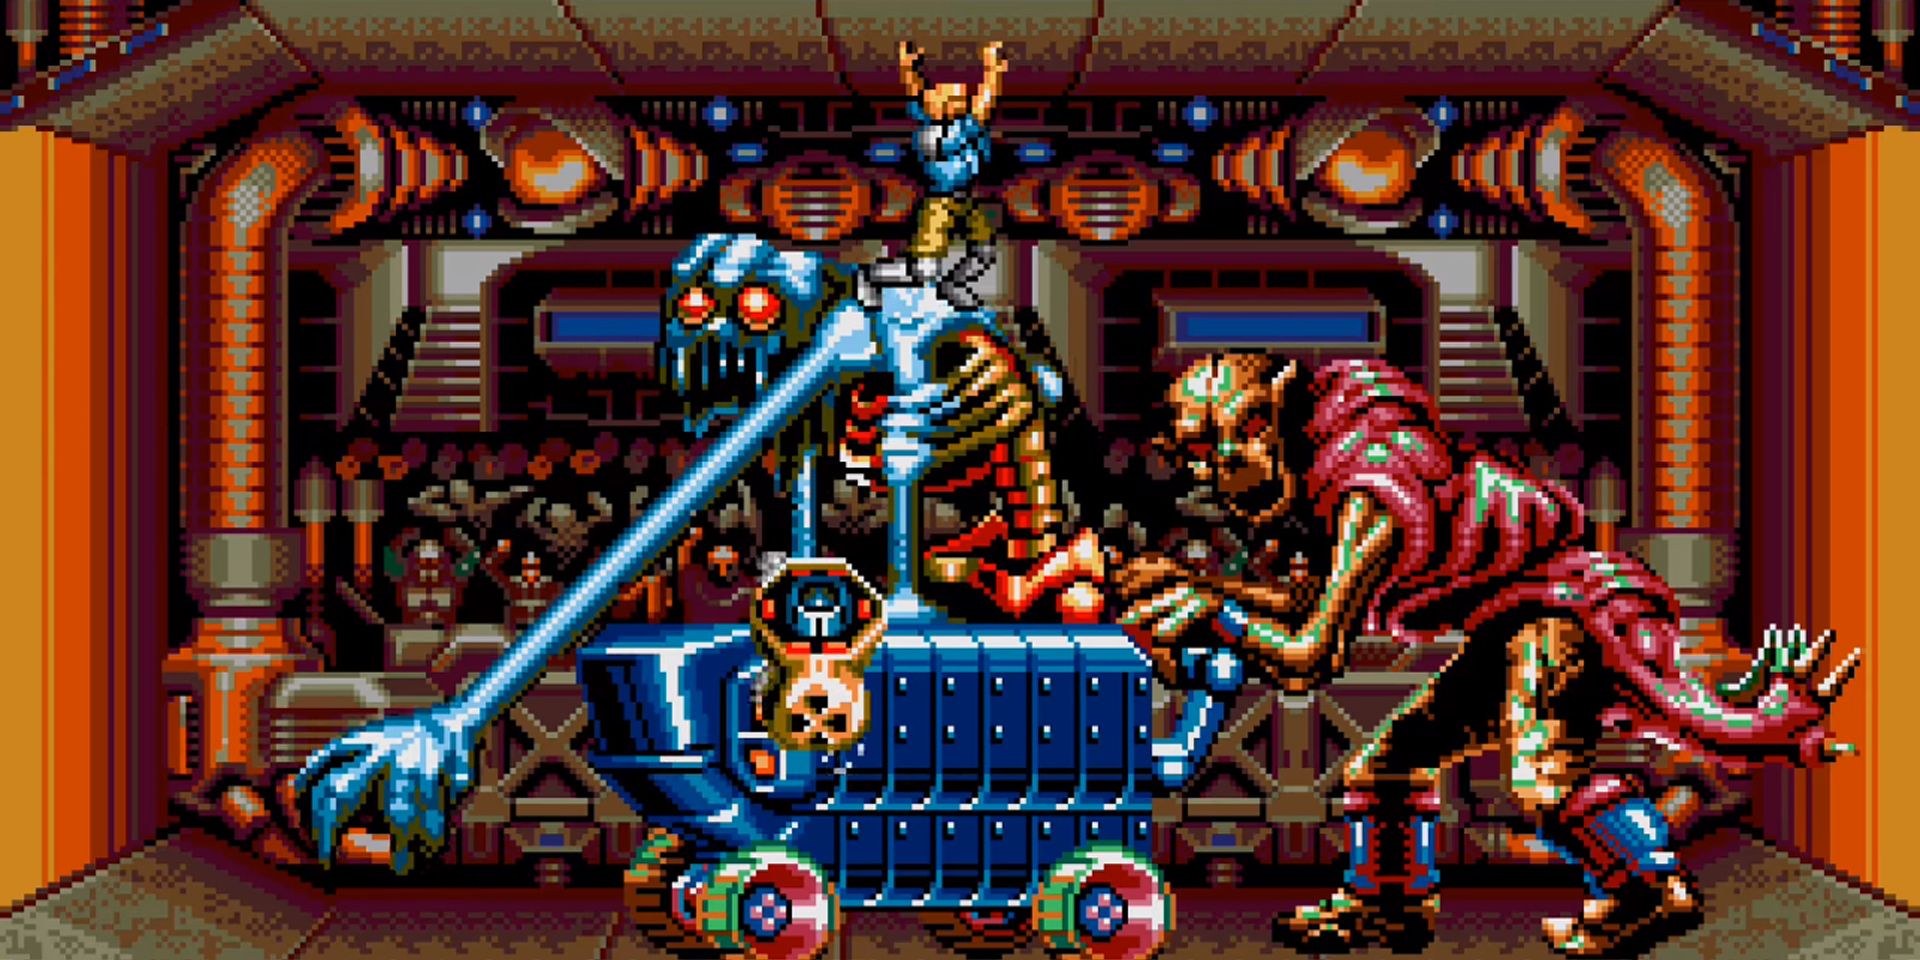 Ray battles the Psycho Mother in Contra Hard Corps.